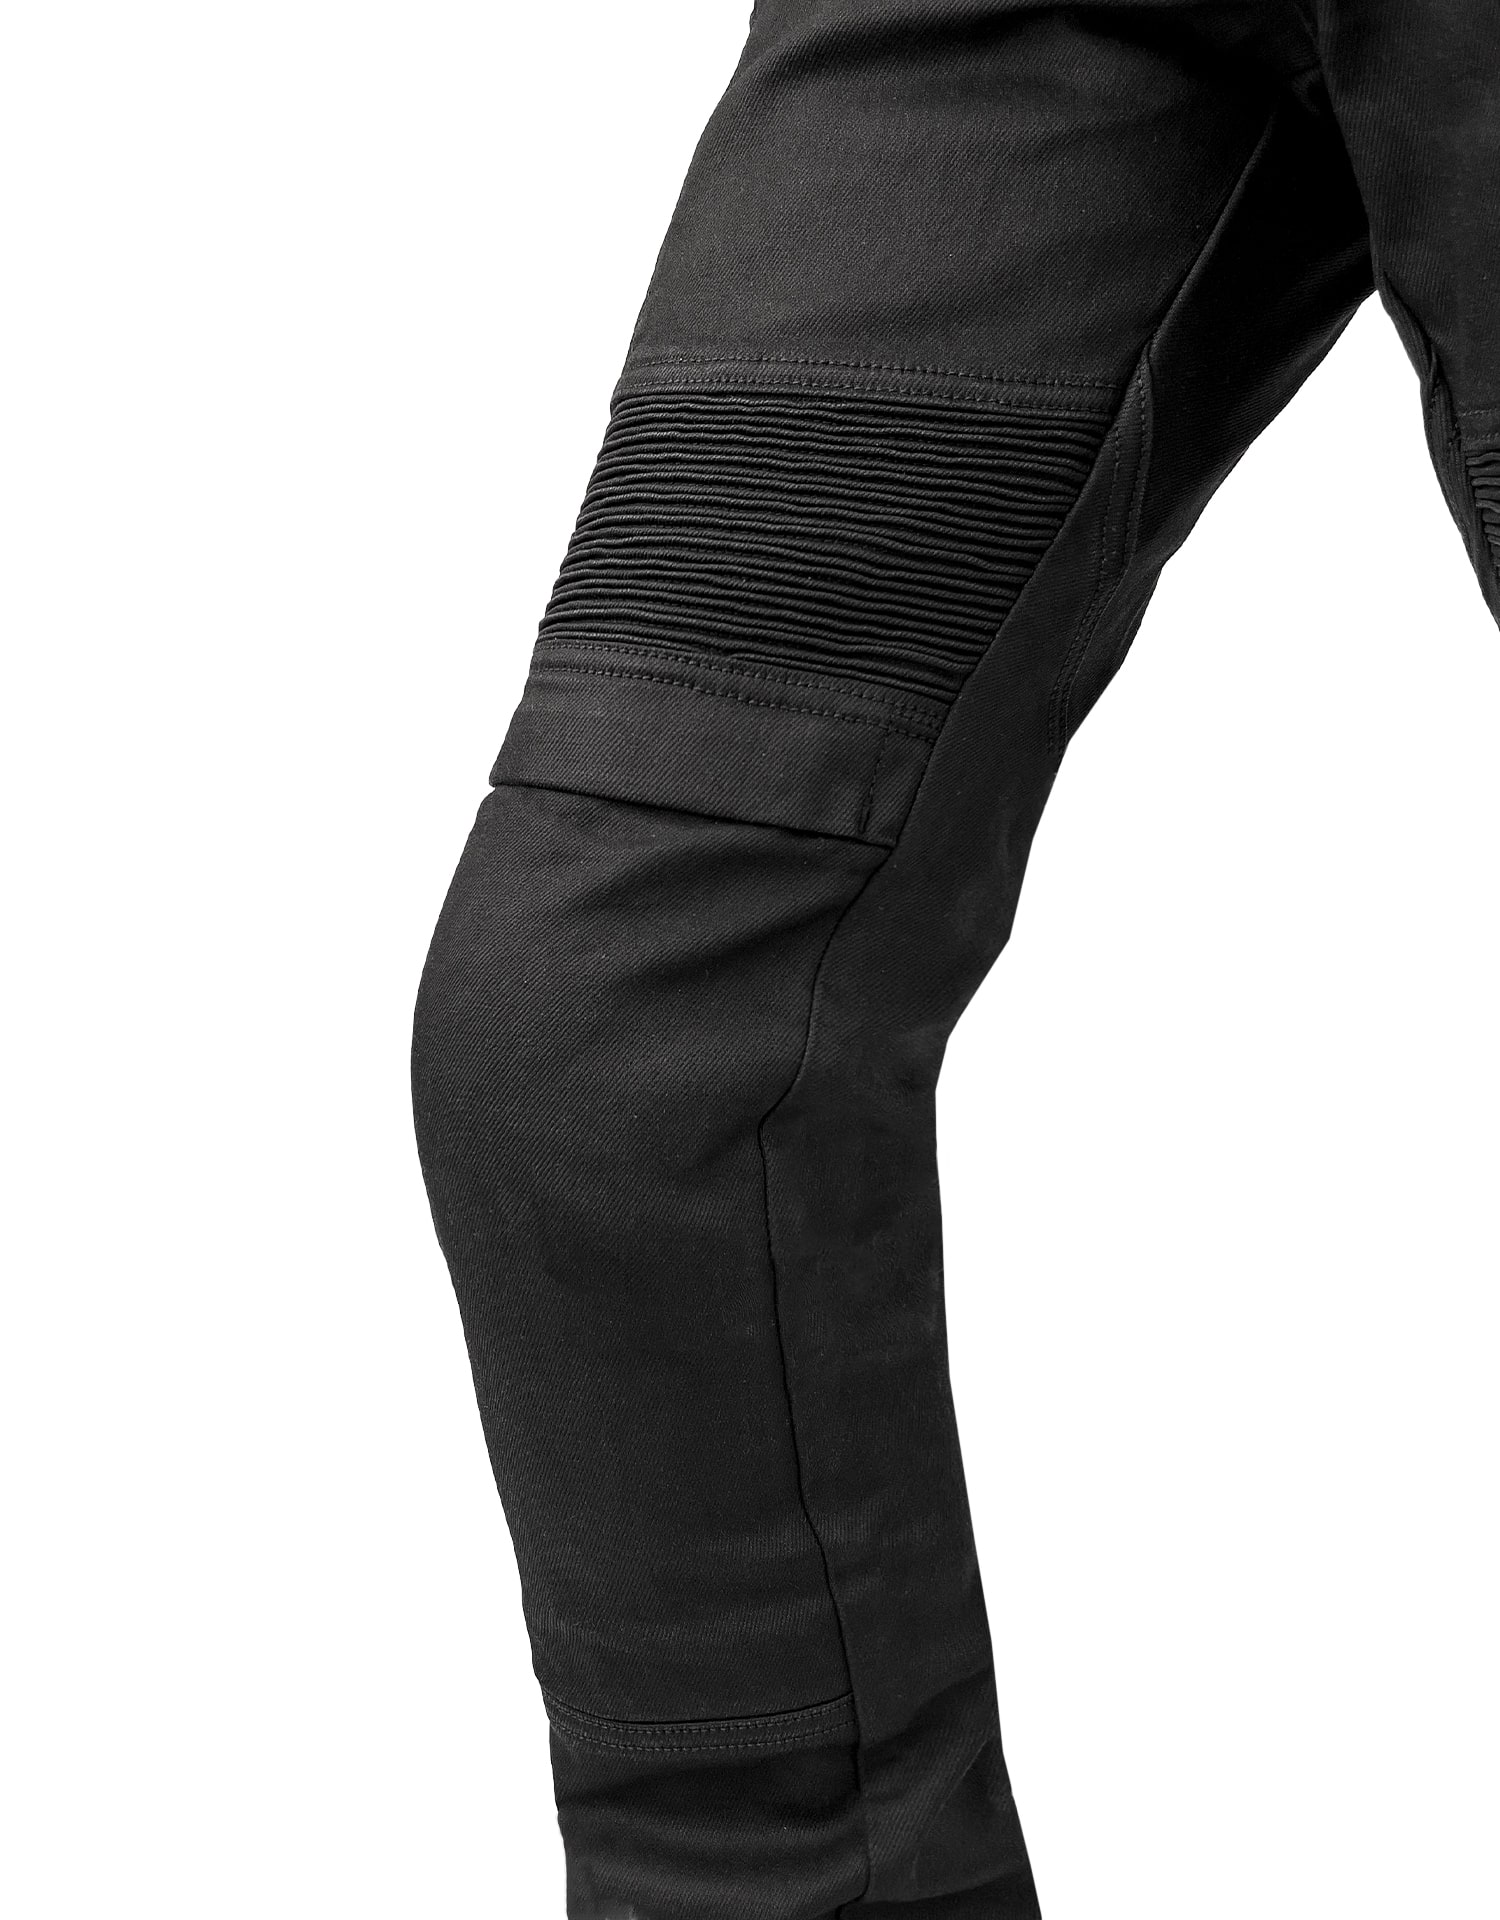 Motorbike Trousers, Mens Motorcycle Pants Made with Kevlar Breathable  Wear-resistant Reinforced Protective Jeans Removable Extended Pads Armoured  (Blue,XL) price in Saudi Arabia | Amazon Saudi Arabia | kanbkam